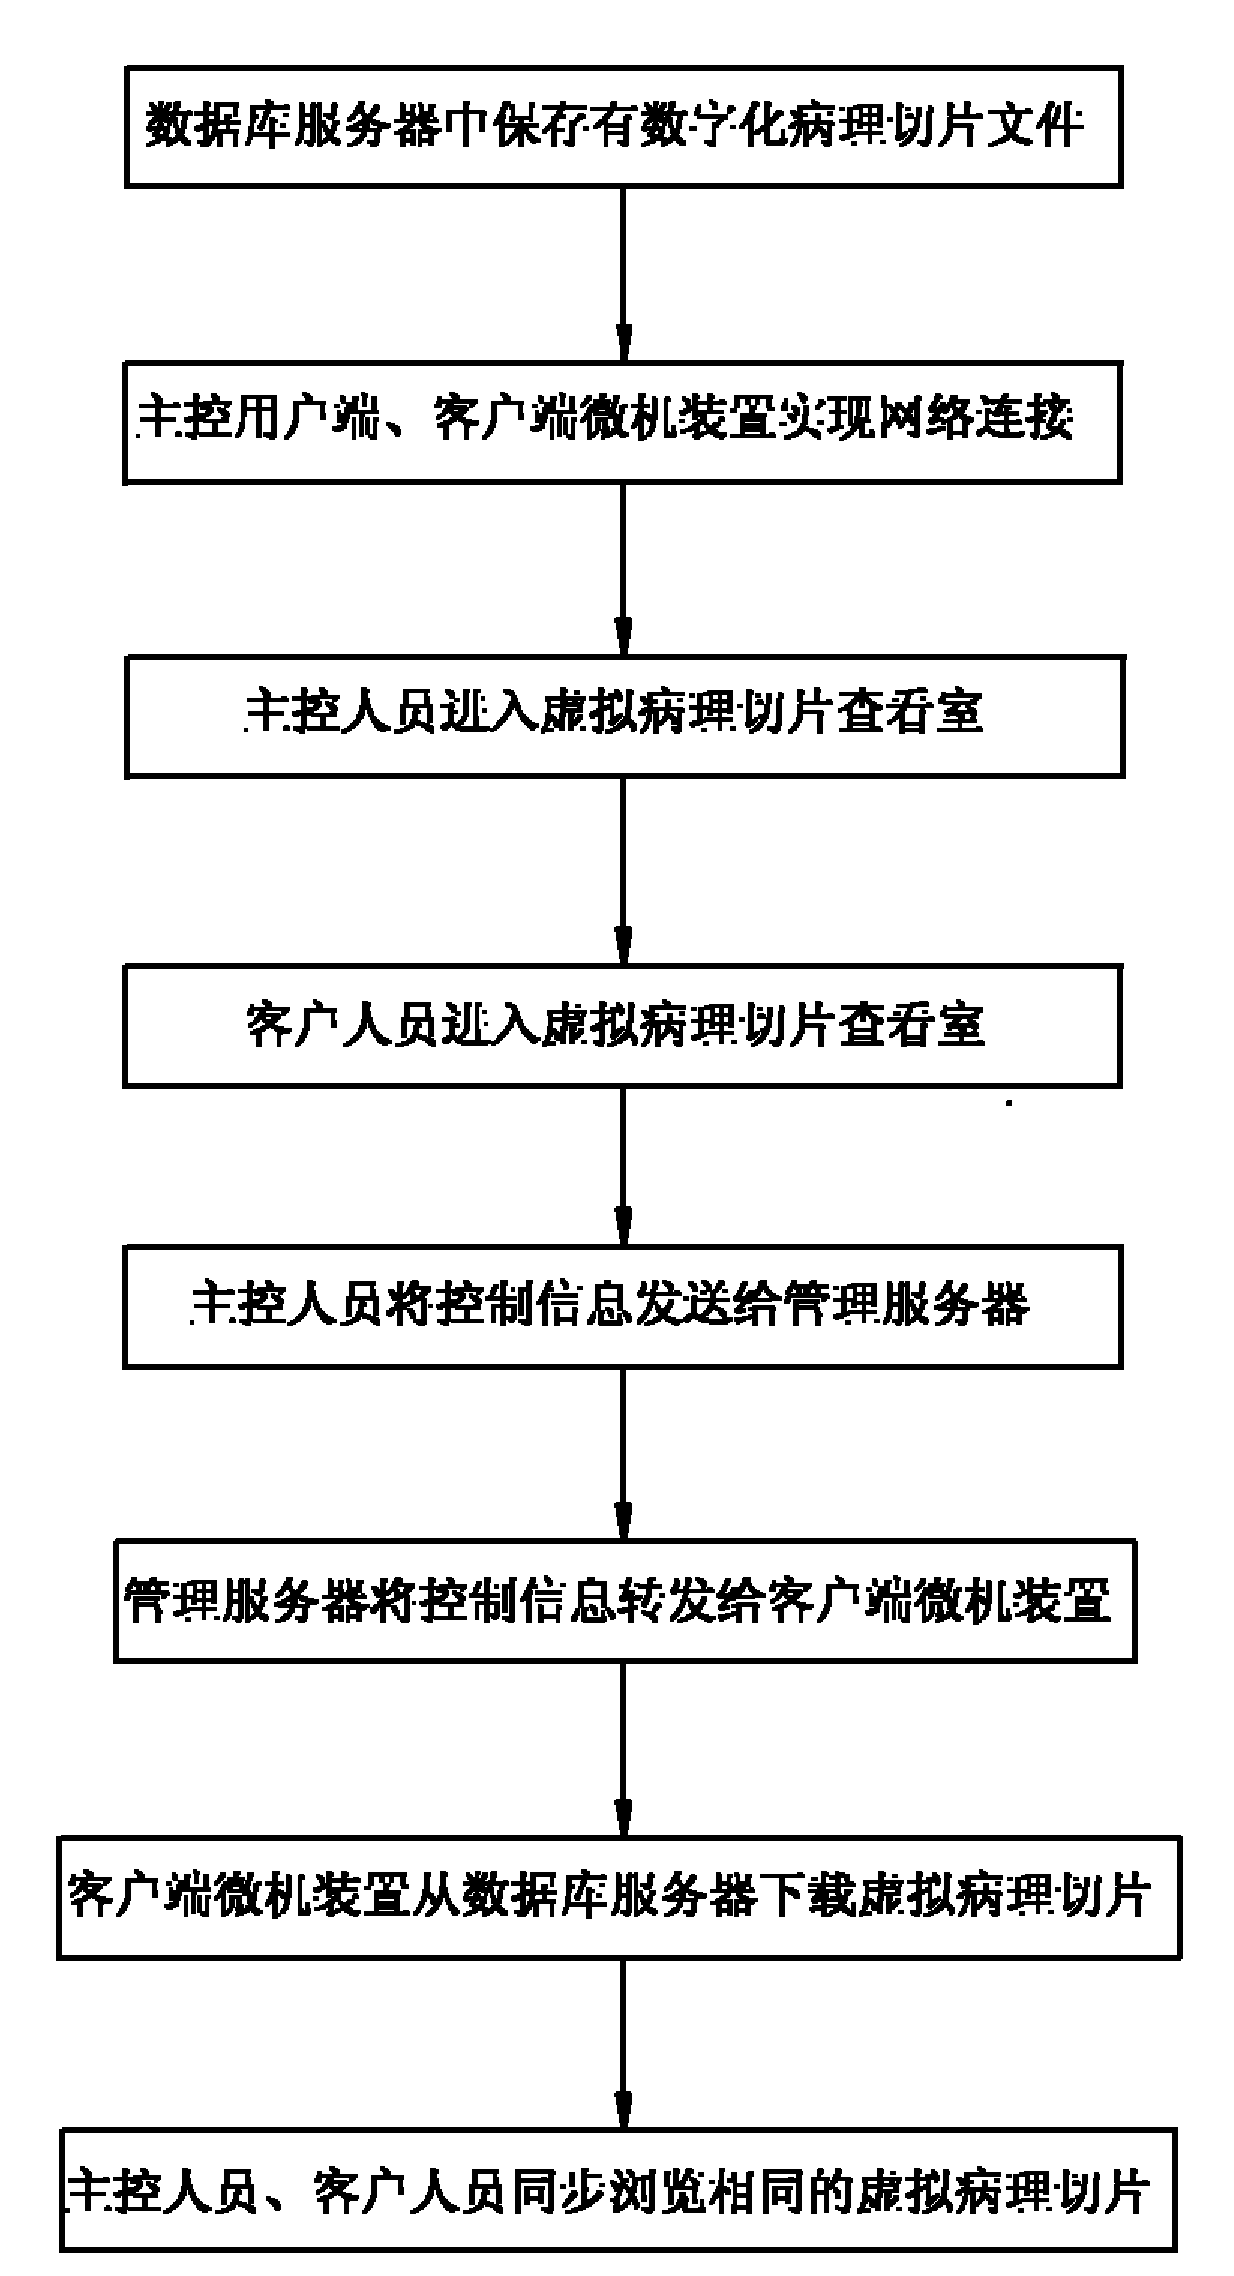 Method for remotely and synchronously browsing virtual pathological section